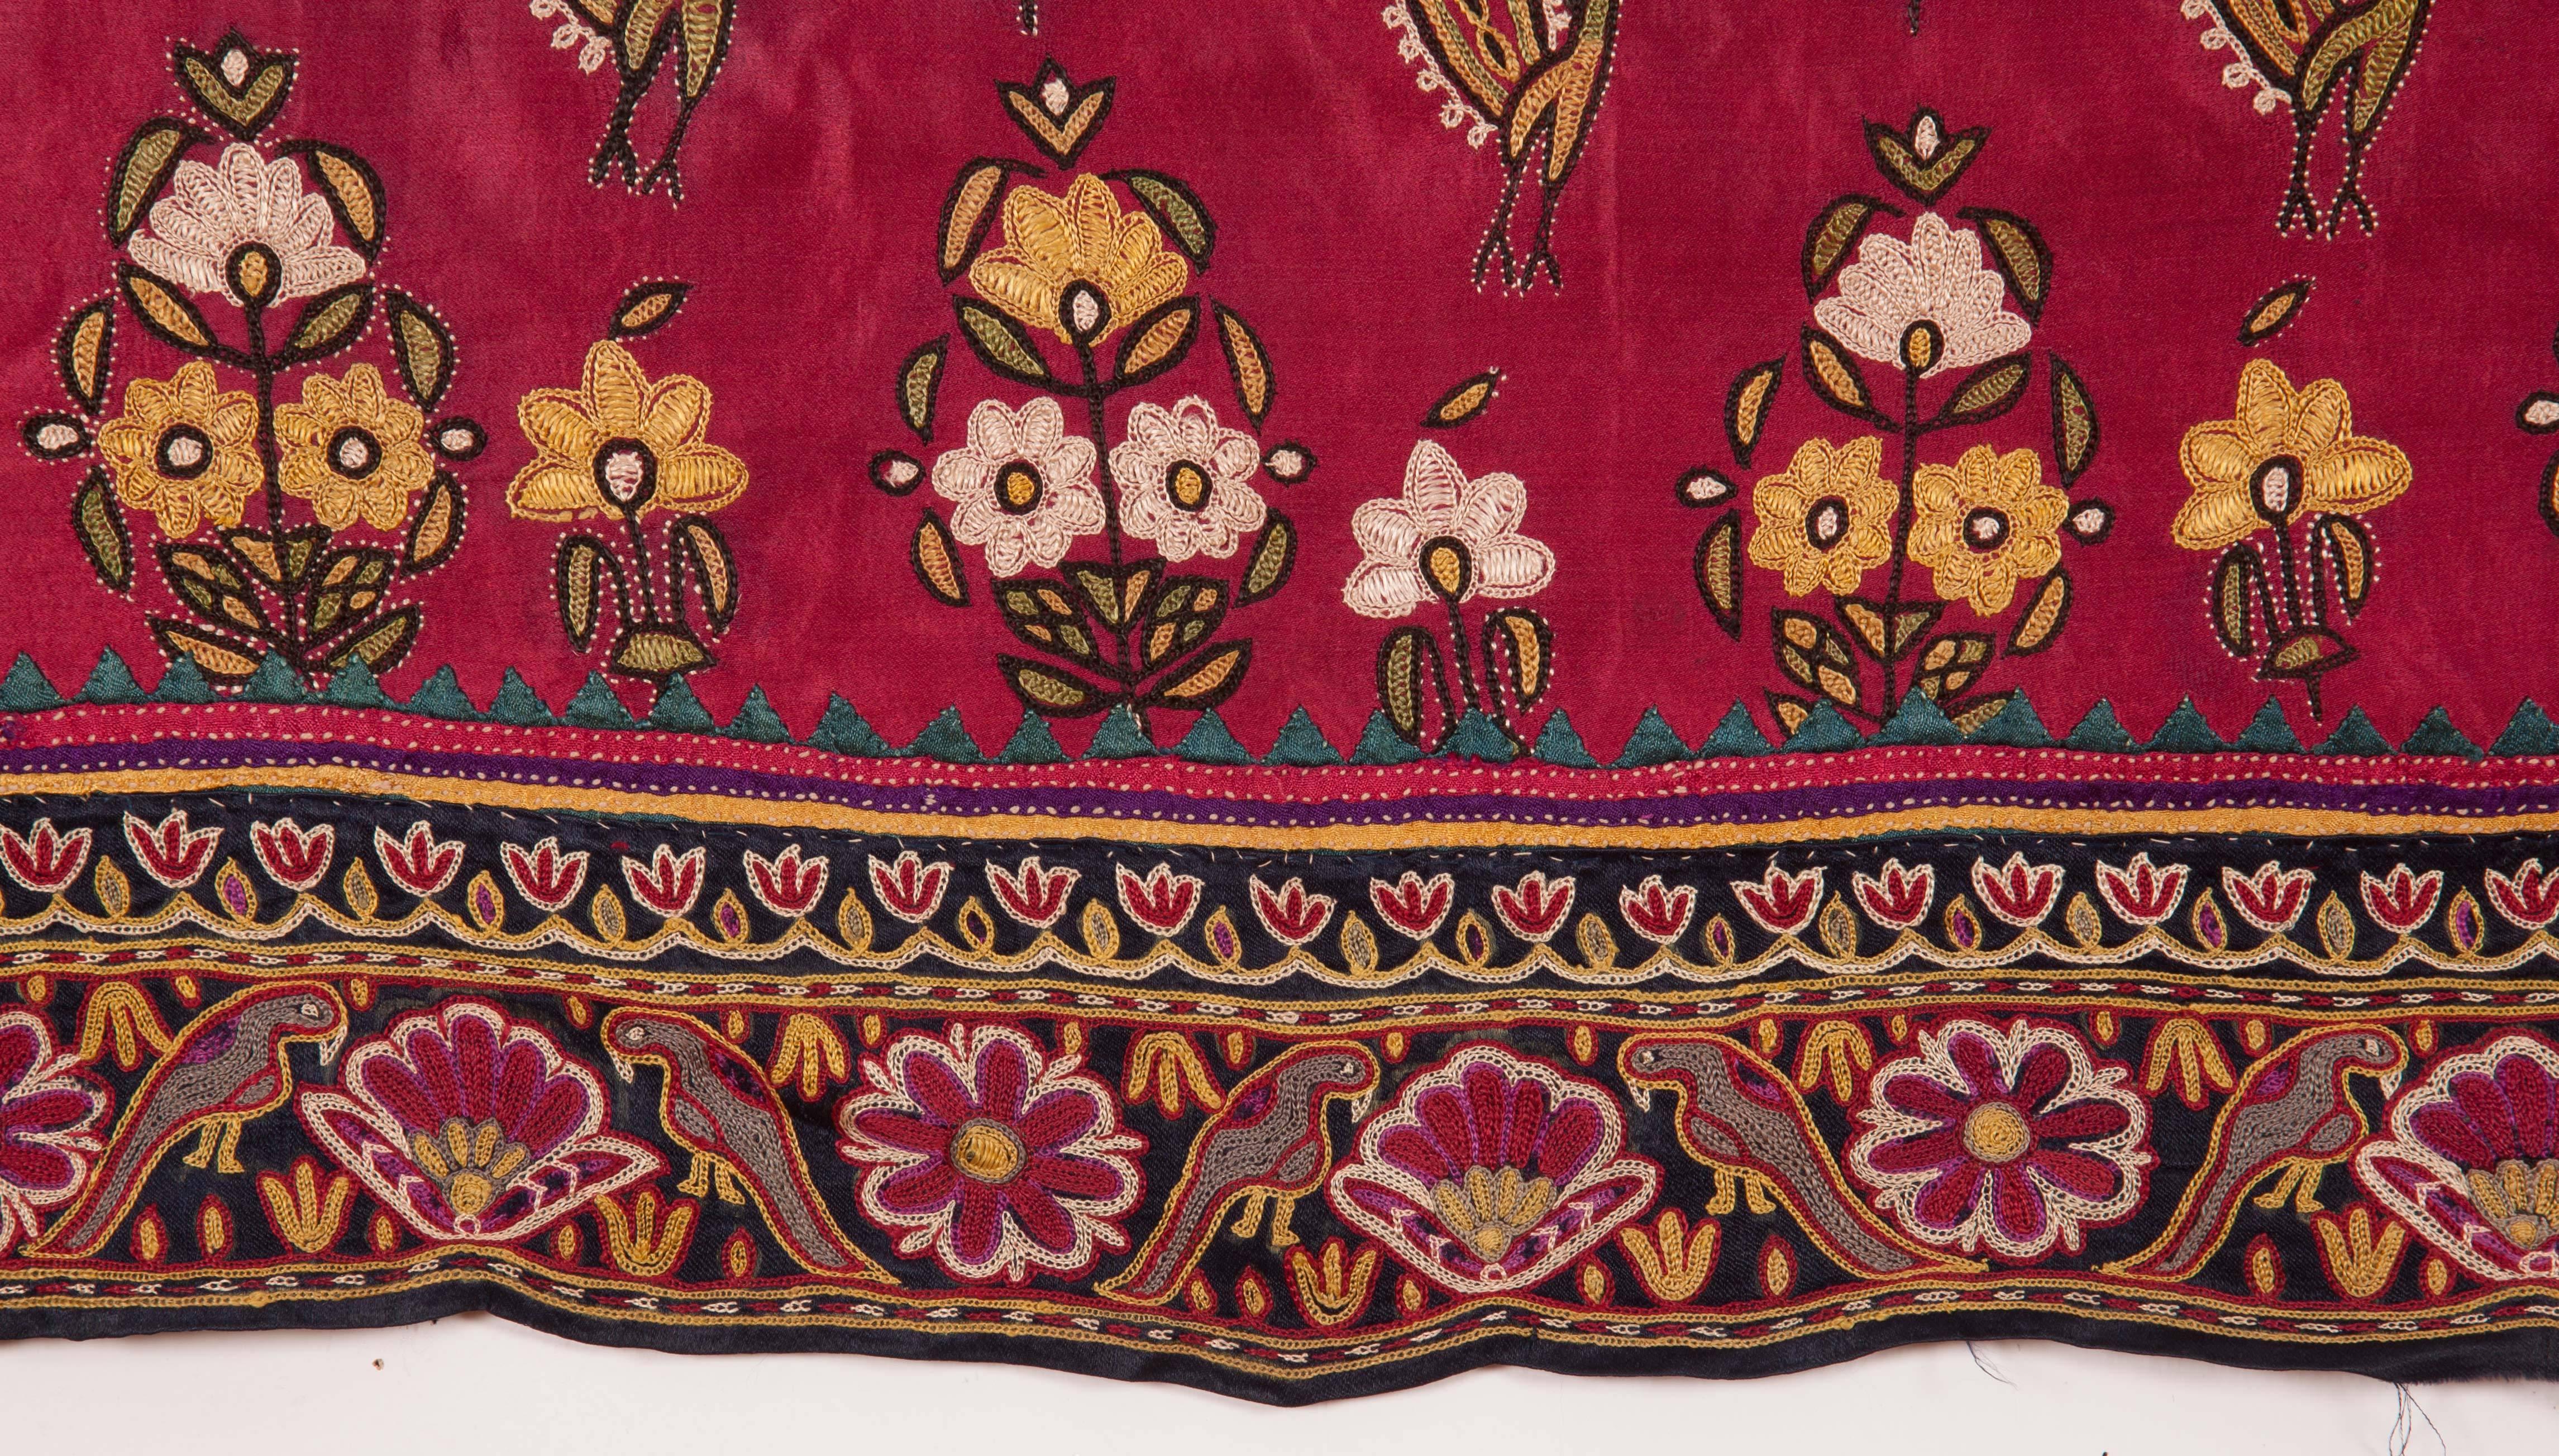 Suzani Early 20th Century Embroidered Skirt Panel from Kutch India